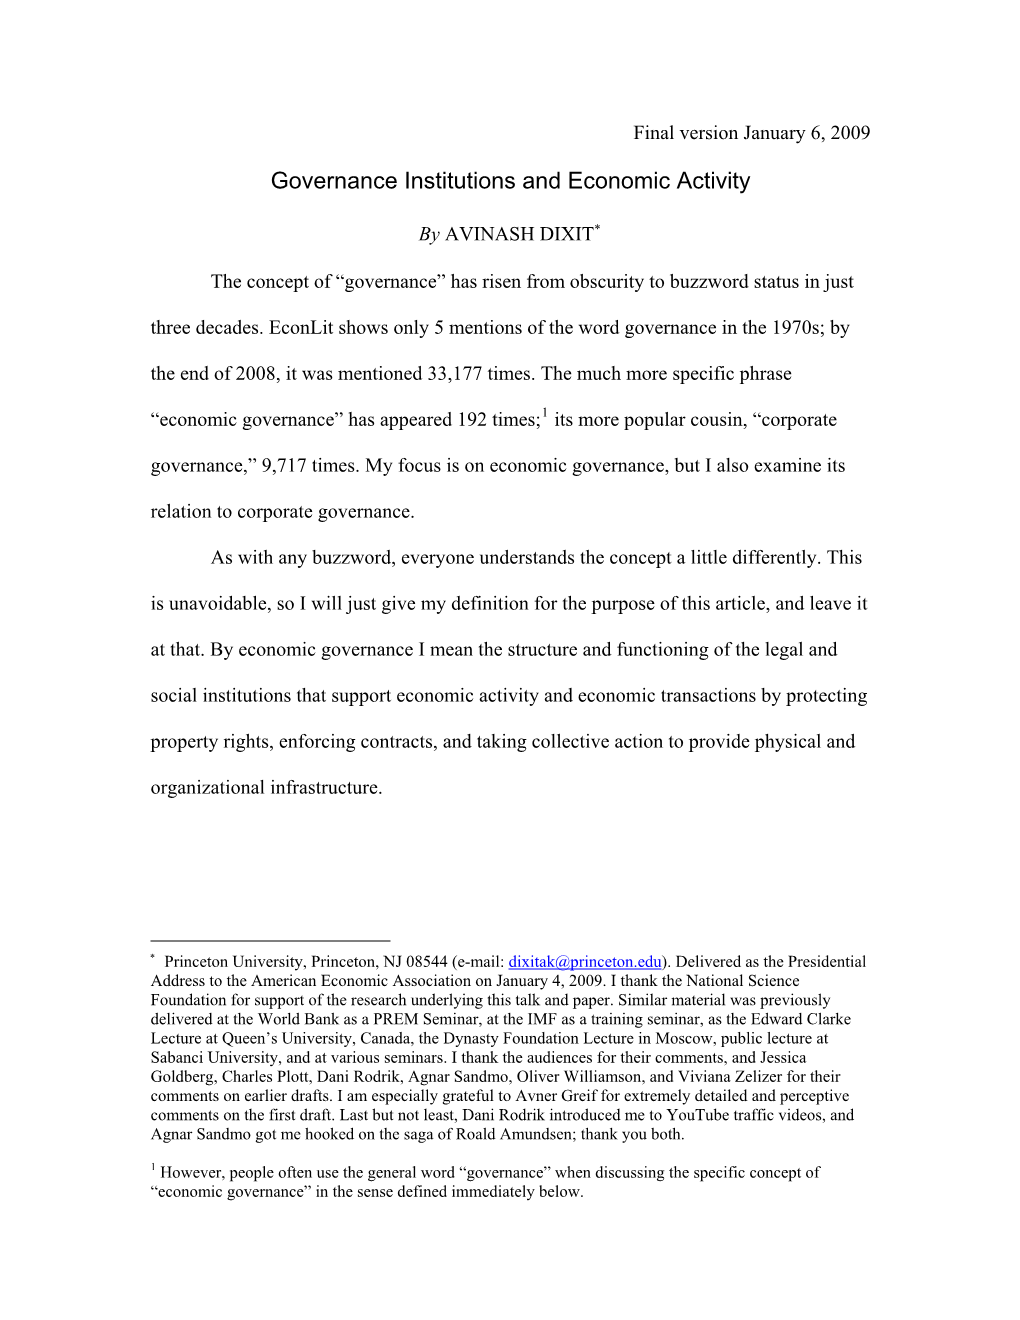 Governance Institutions and Economic Activity